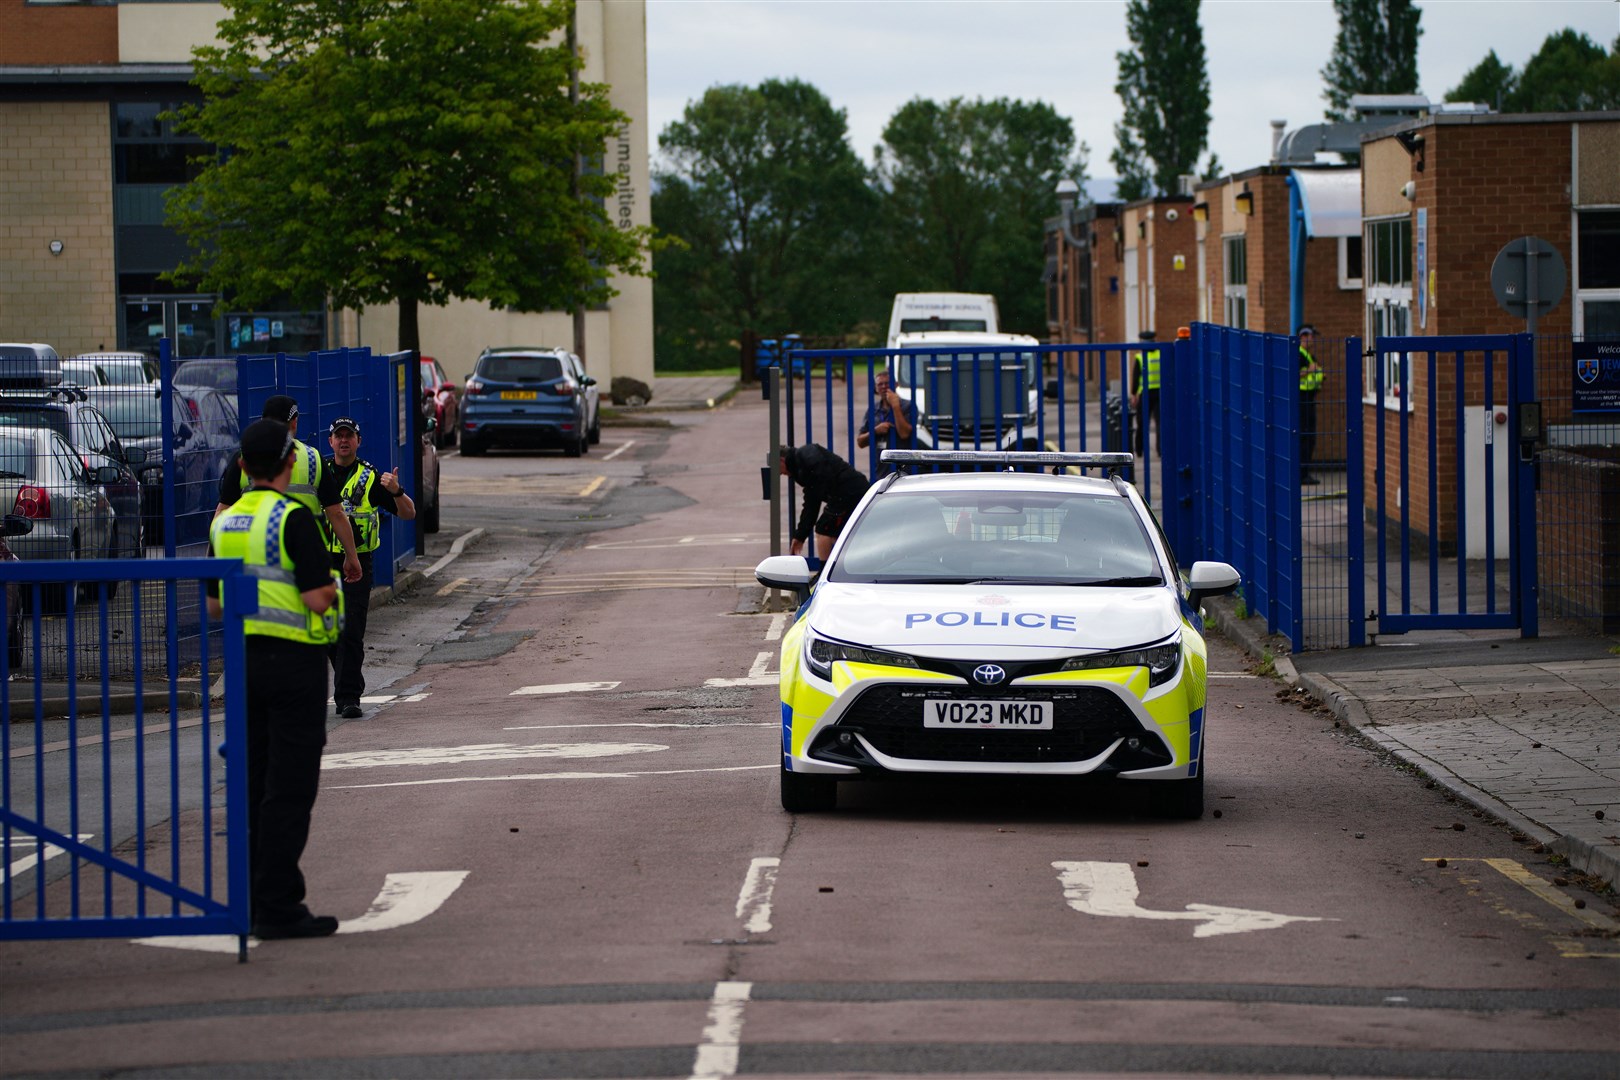 Education Secretary Gillian Keegan praised the emergency service workers called to the school on Monday morning (Ben Birchall/PA)